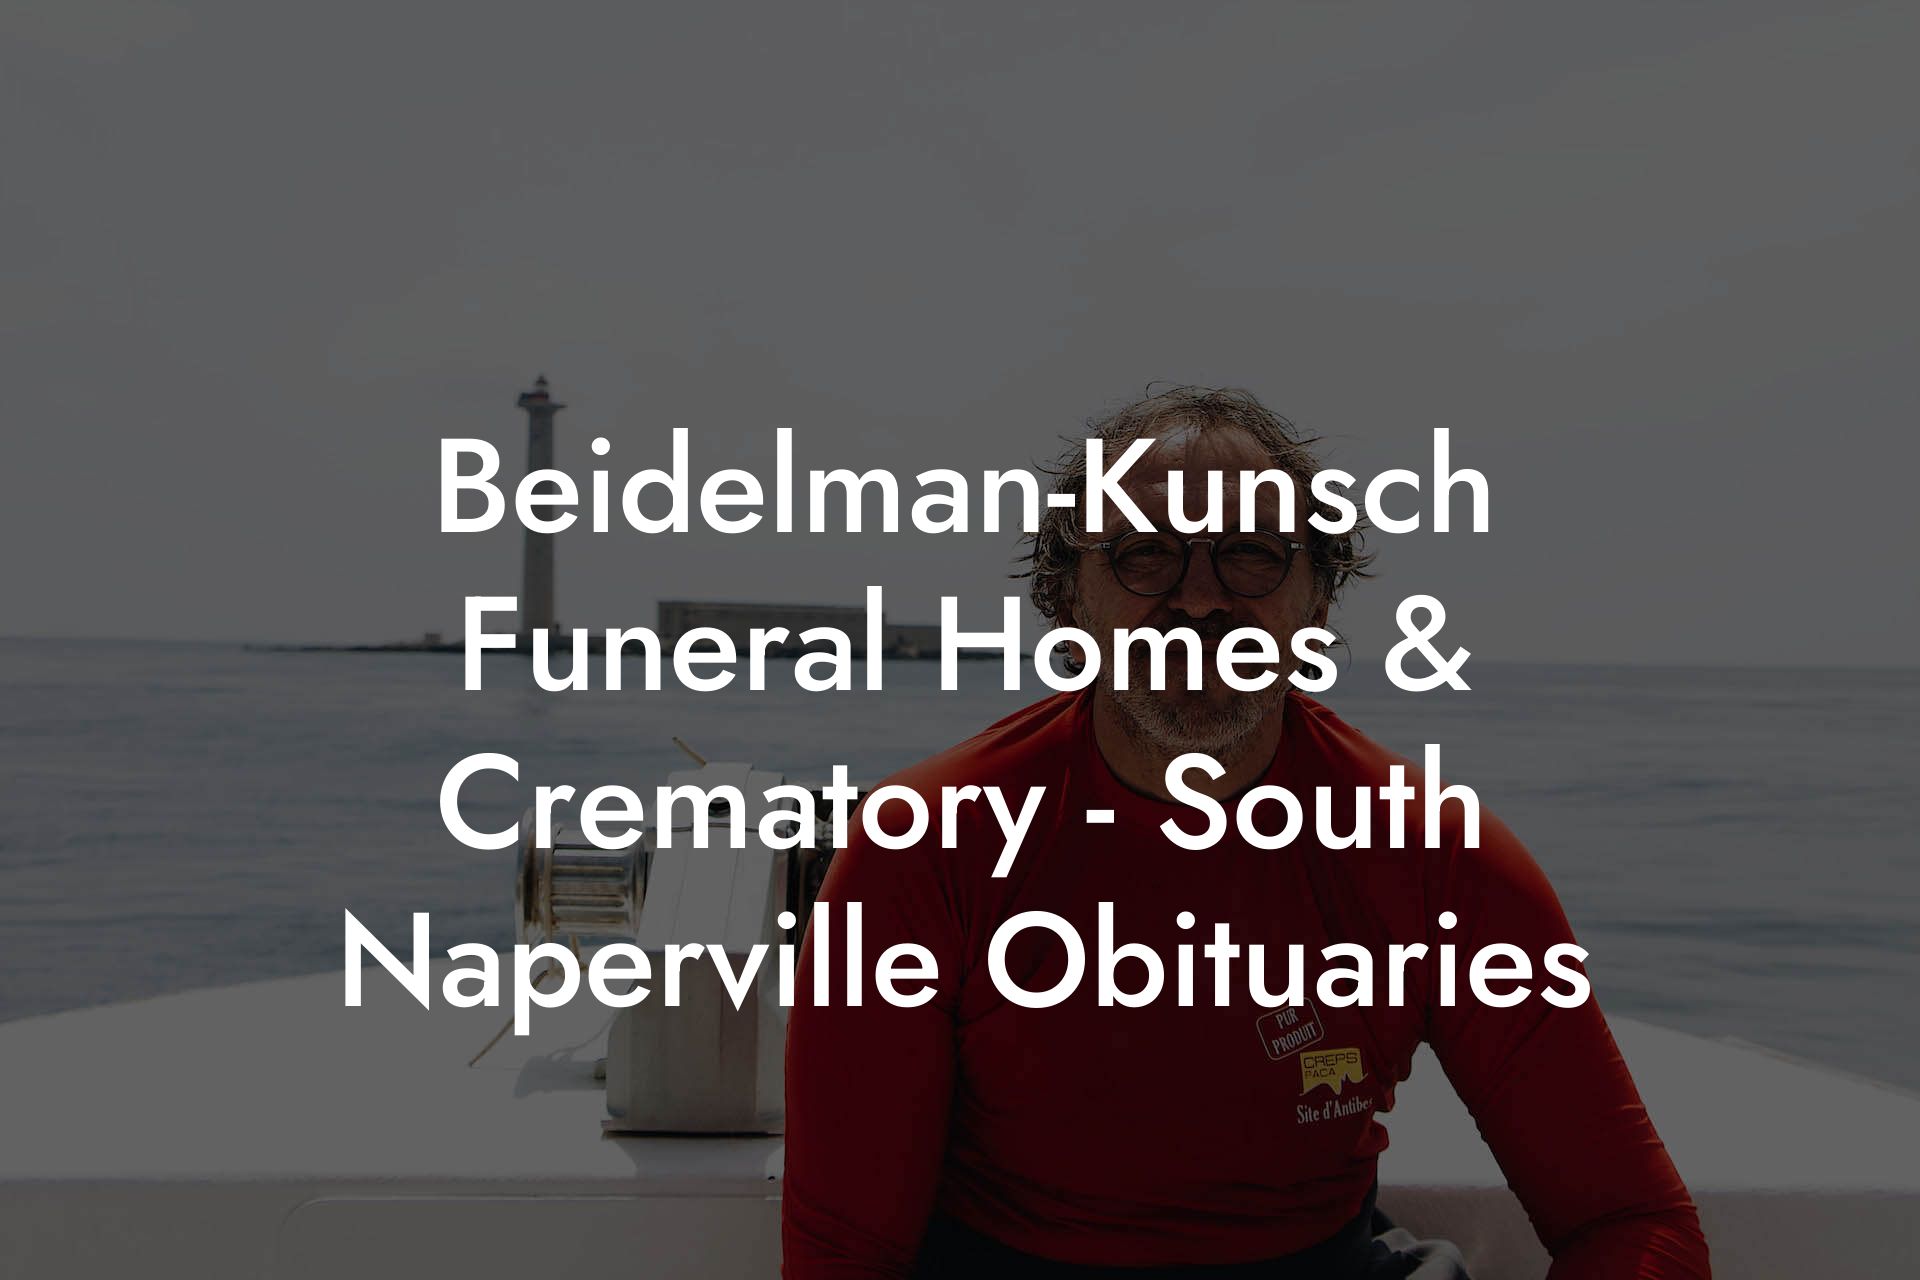 Beidelman-Kunsch Funeral Homes & Crematory - South Naperville Obituaries